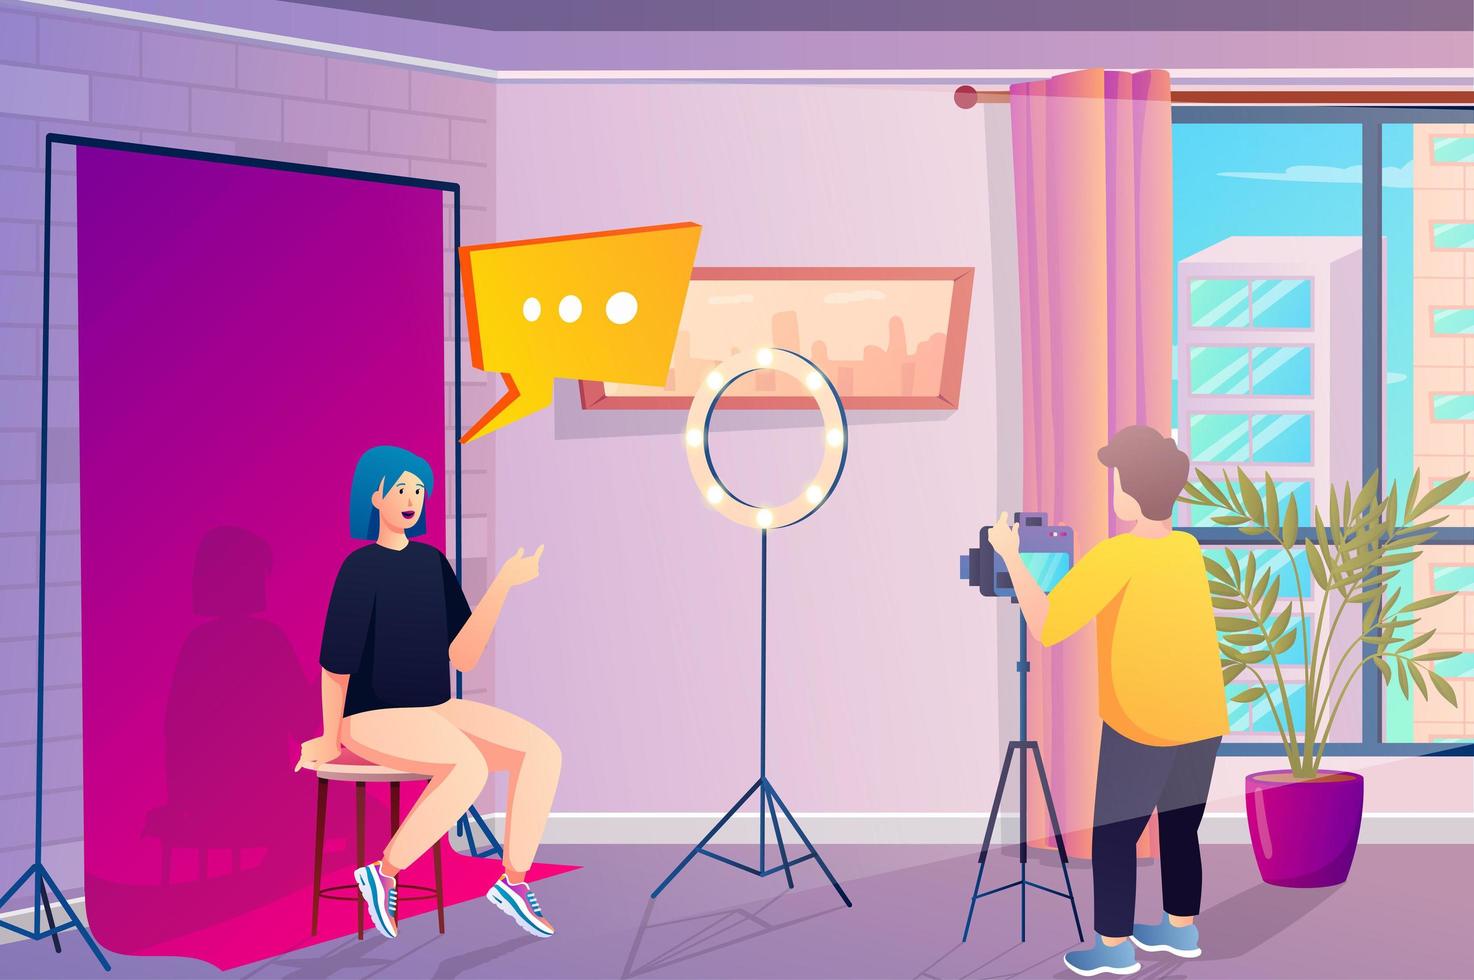 Bloggers room interior concept in flat cartoon design. Woman blogger recording video content with man video operator in professional creative studio. Vector illustration with people scene background